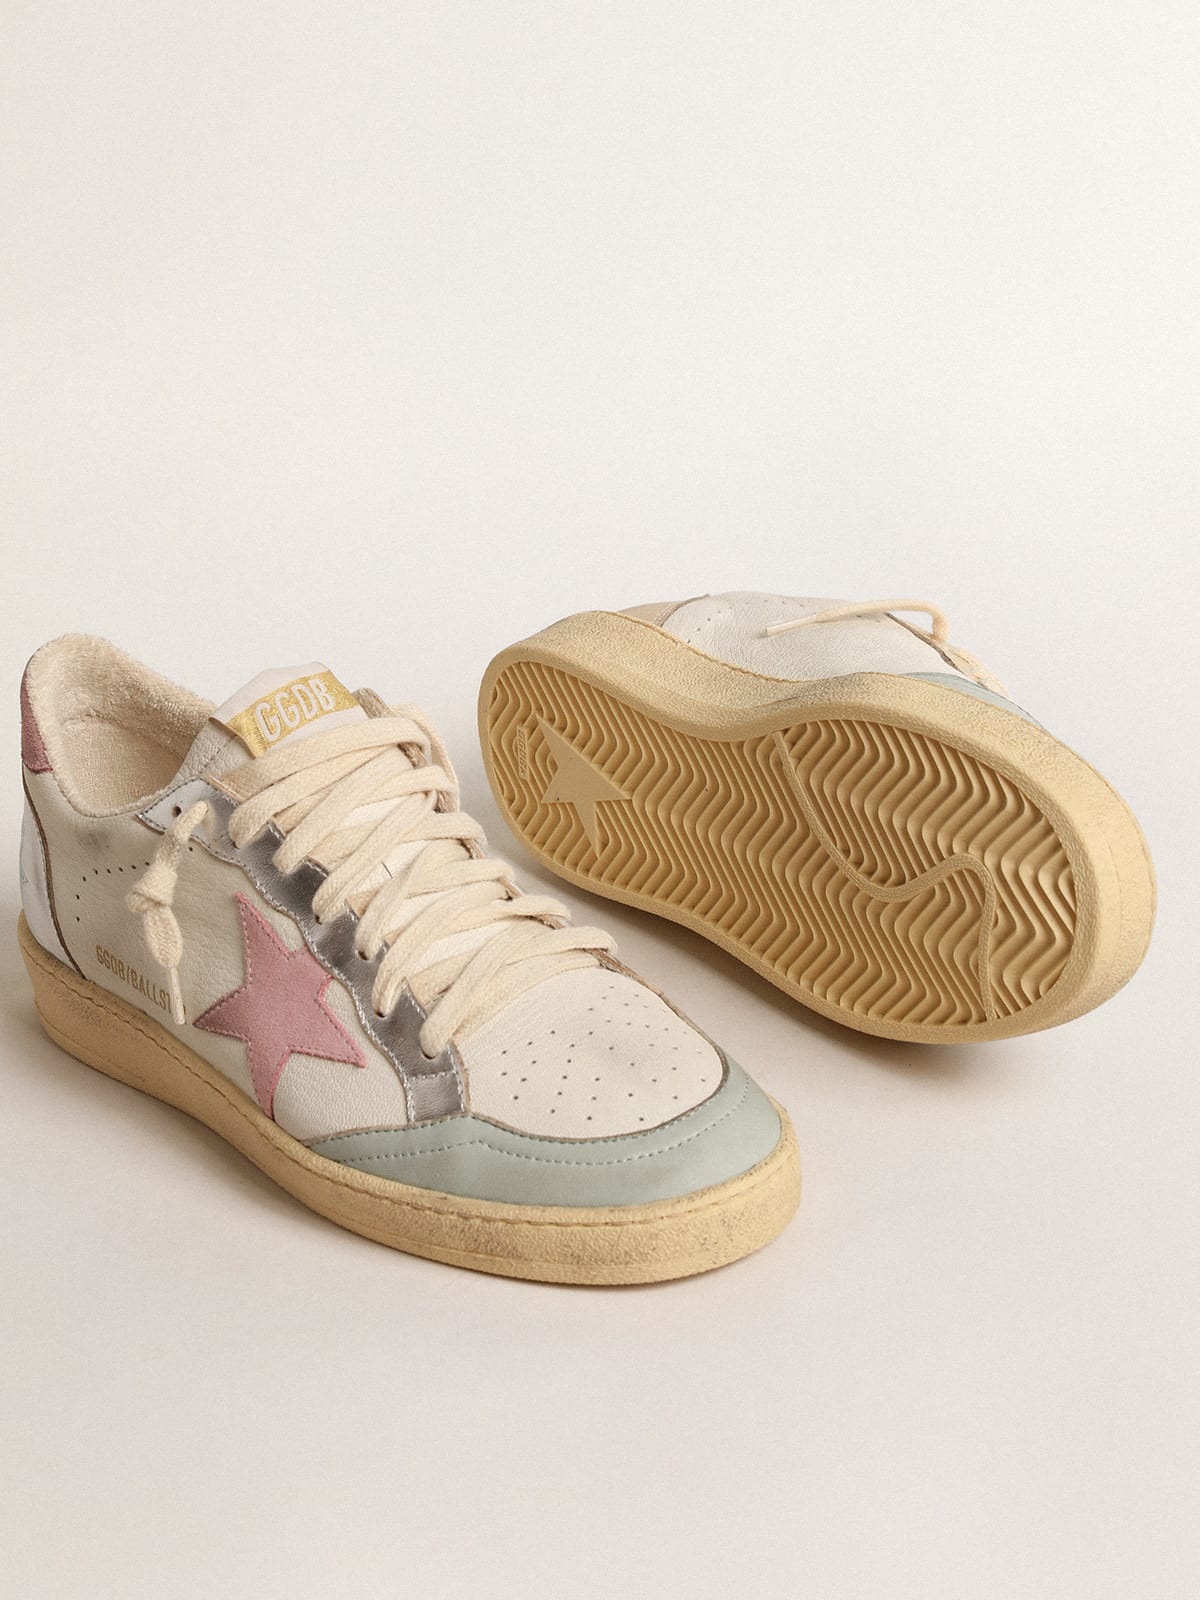 Golden Goose - Ball Star with pink suede star and metallic leather inserts in 